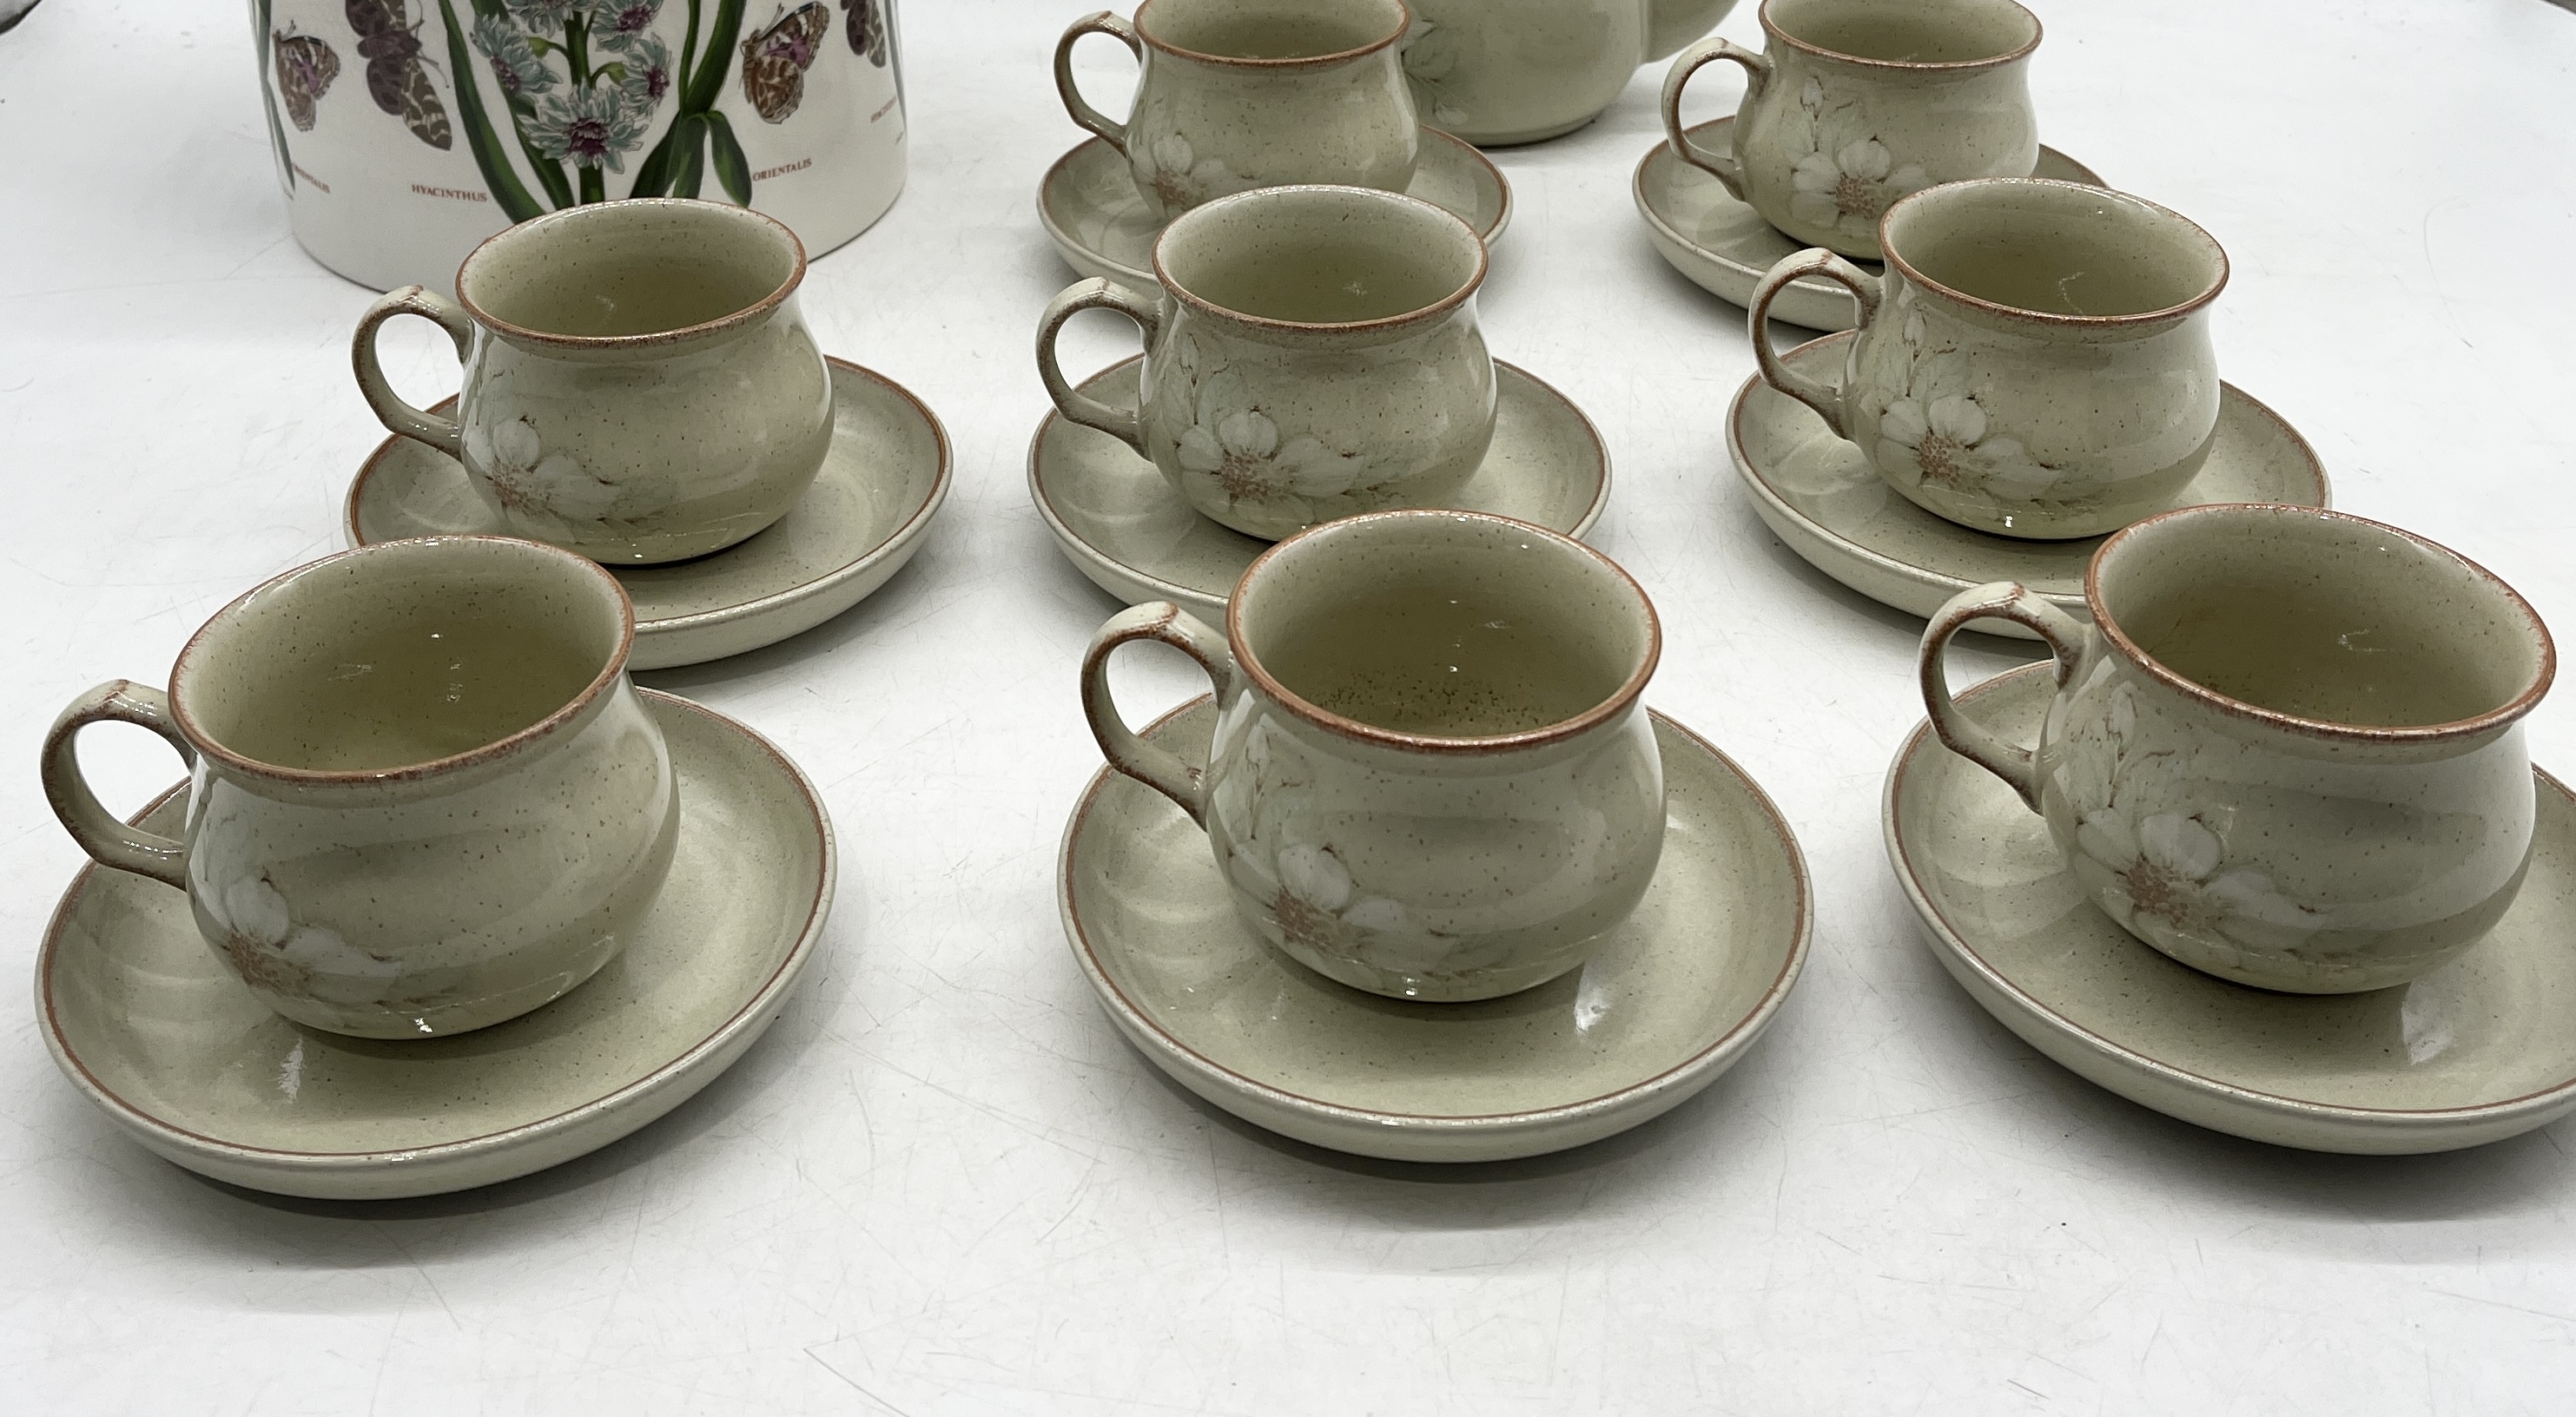 A Denby part tea set with teapot and eight cups and saucers along with a Portmeirion planter - Image 2 of 3